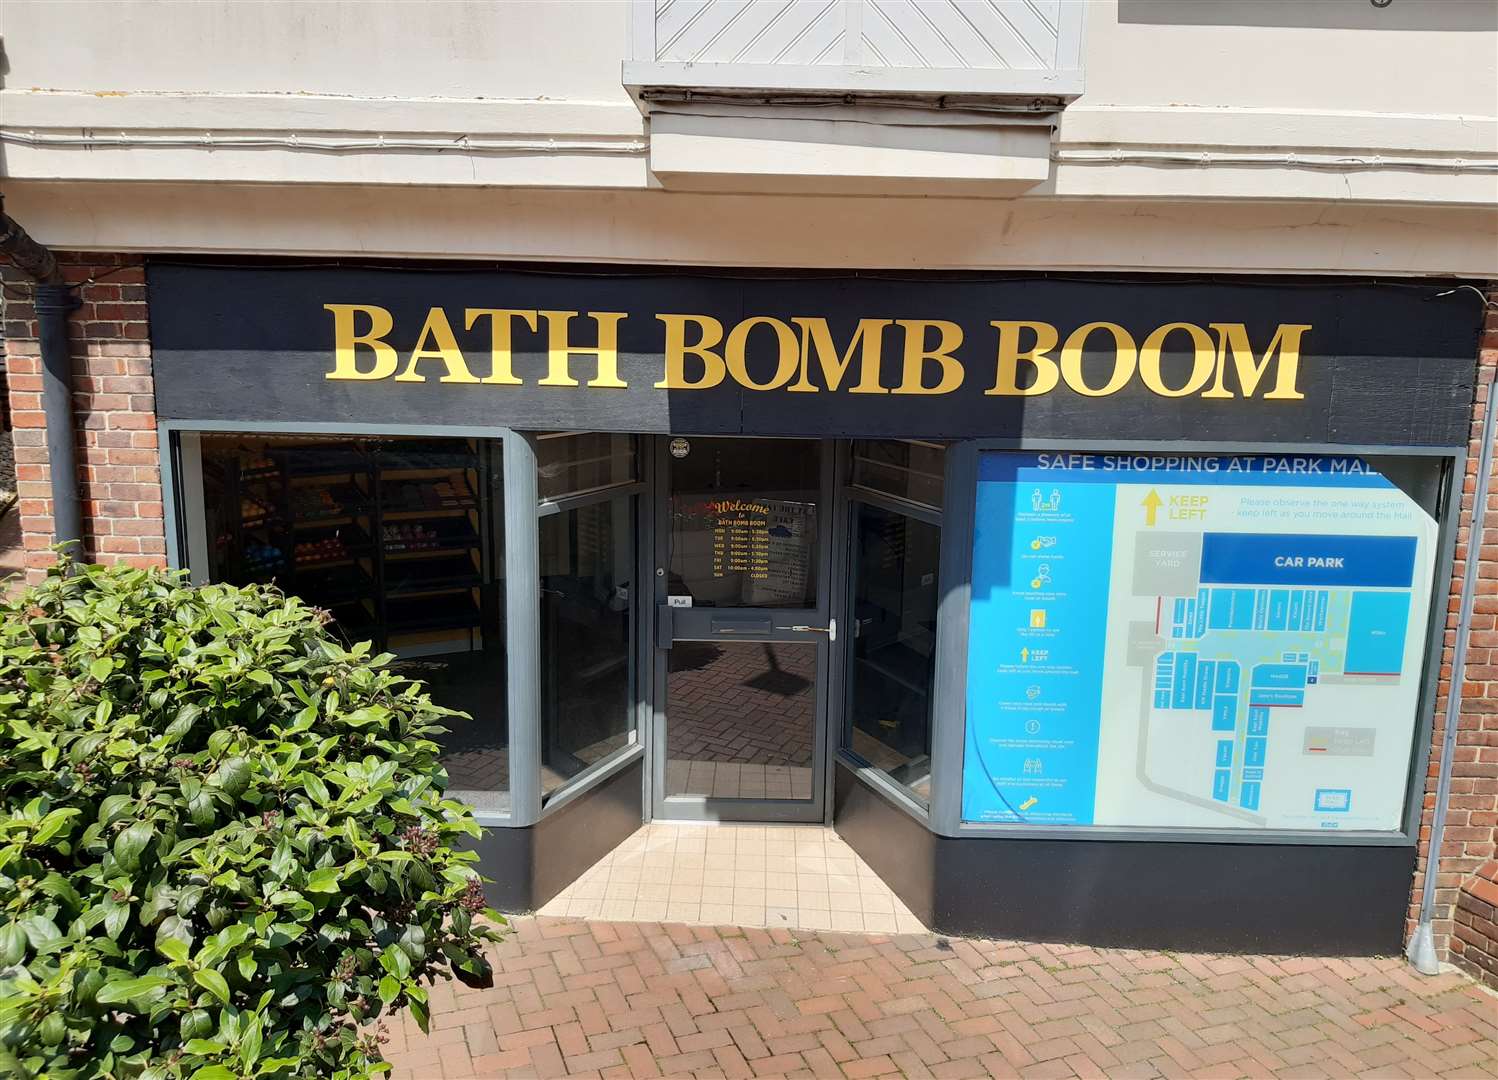 Bath Bomb Boom has filled the former Office Angels unit in Park Mall